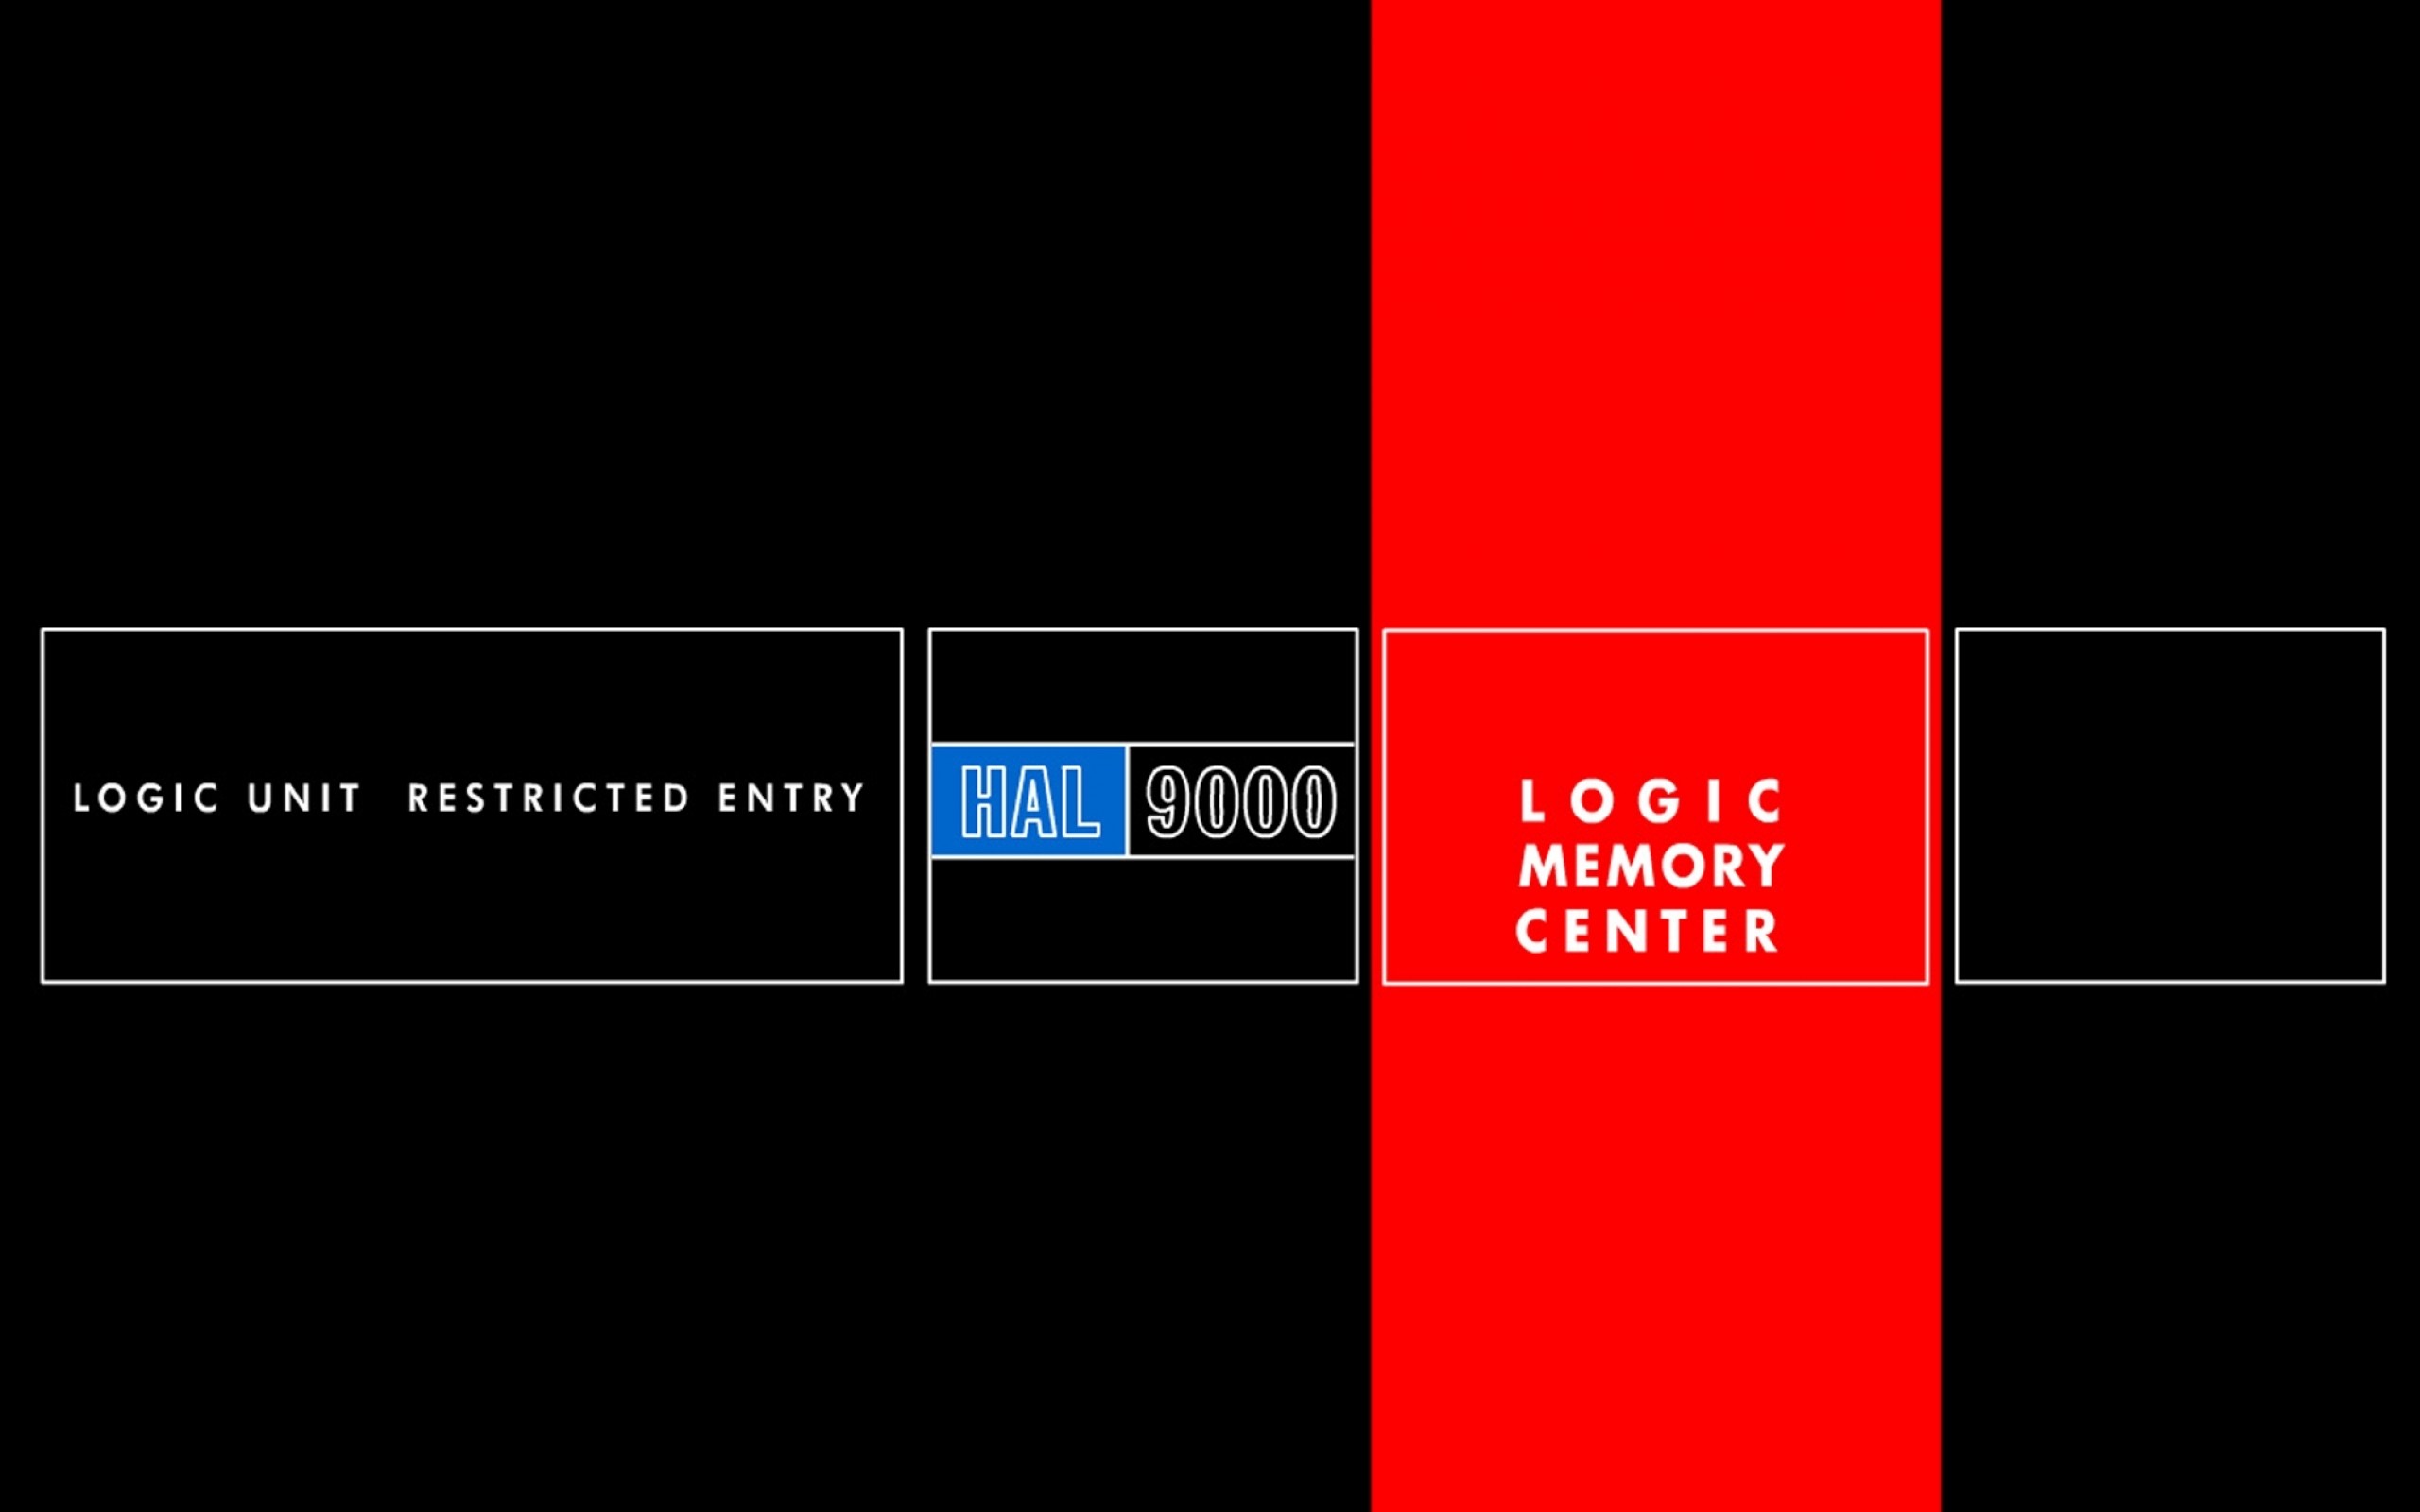 General 2560x1600 2001: A Space Odyssey HAL 9000 movies Stanley Kubrick logic science fiction